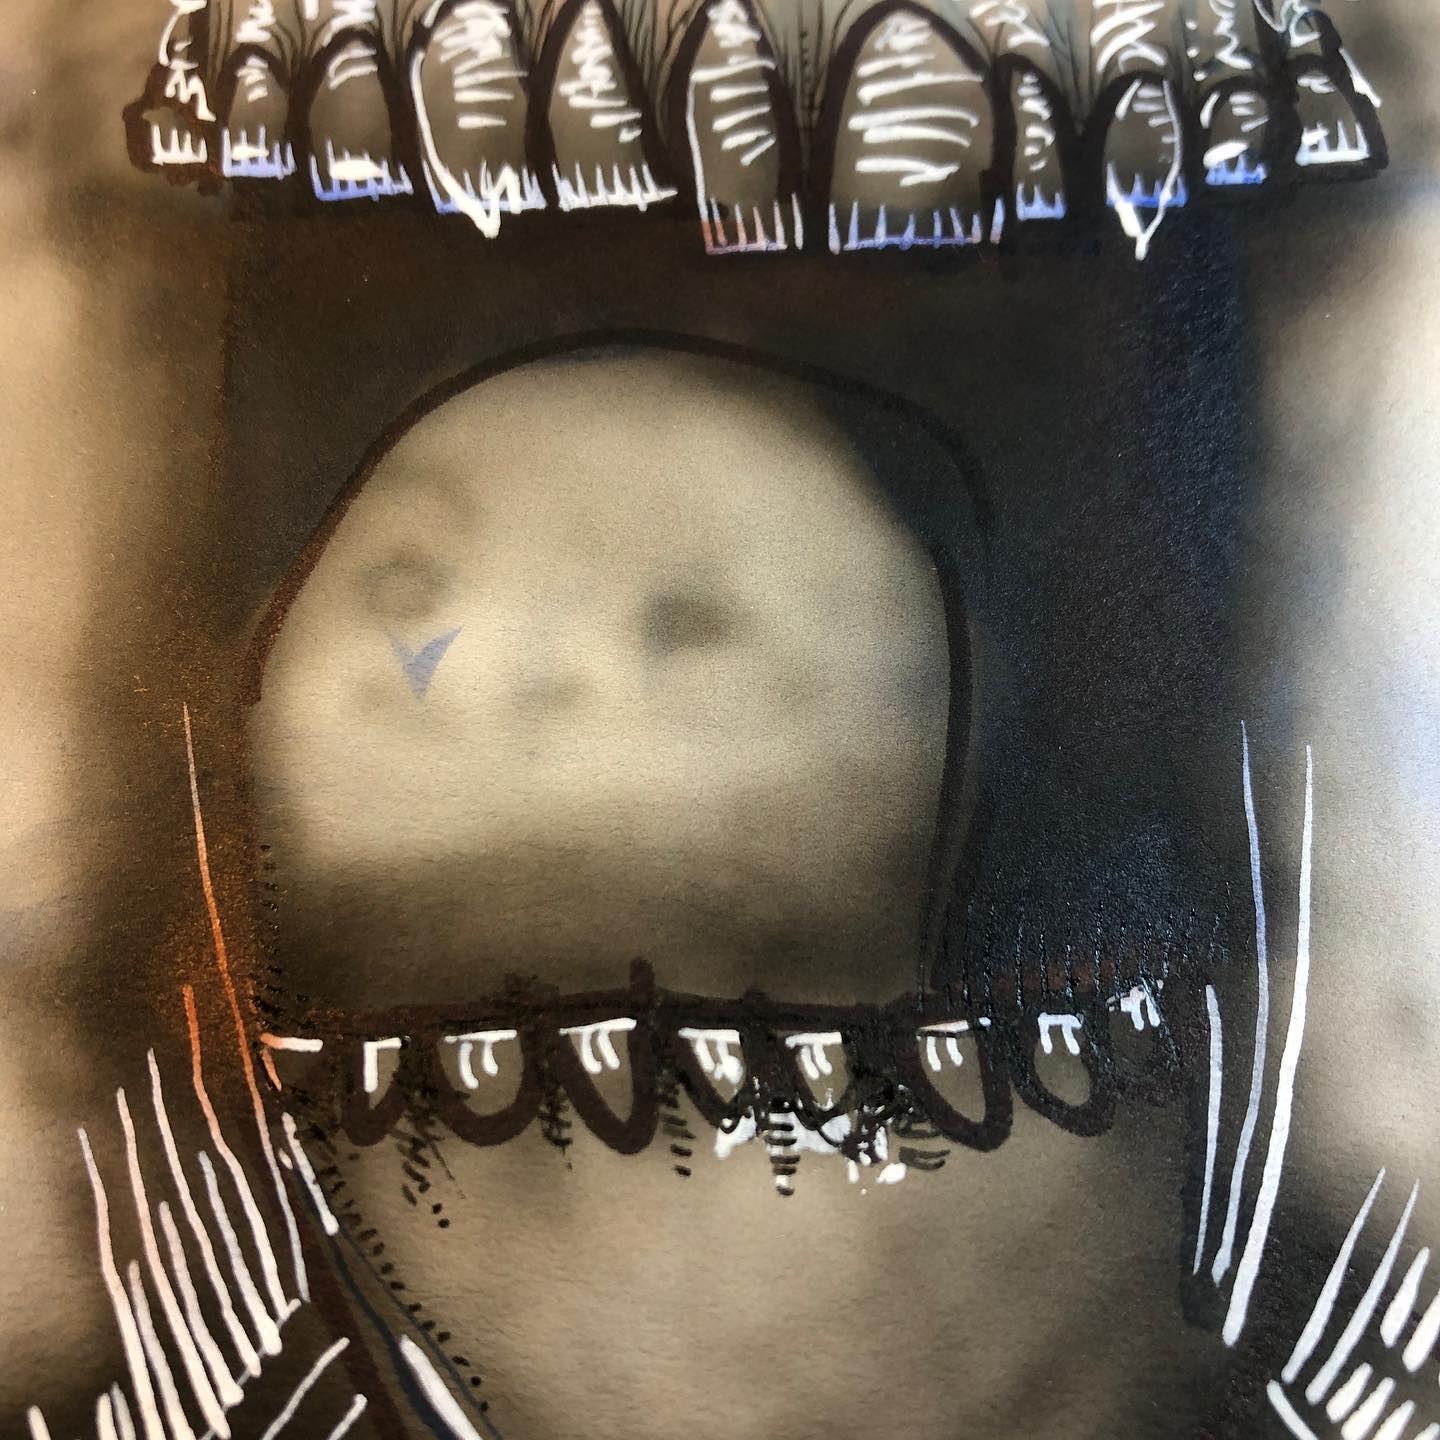 General Dental - airbrush and watercolor painting of a head behind teeth